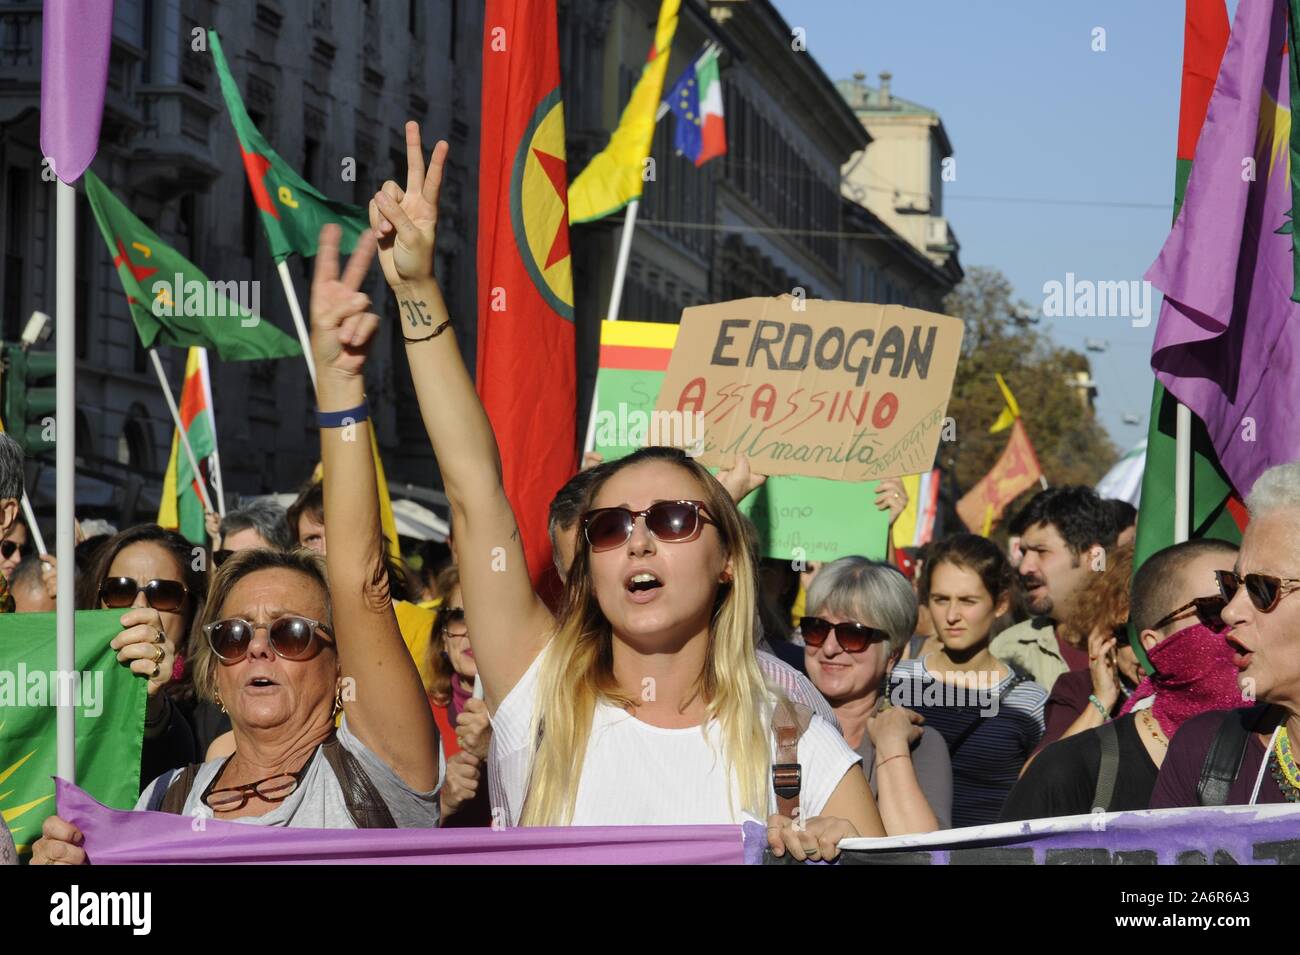 Milan (Italy), 26 October 2019, demonstration in support of the Kurdish people Stock Photo